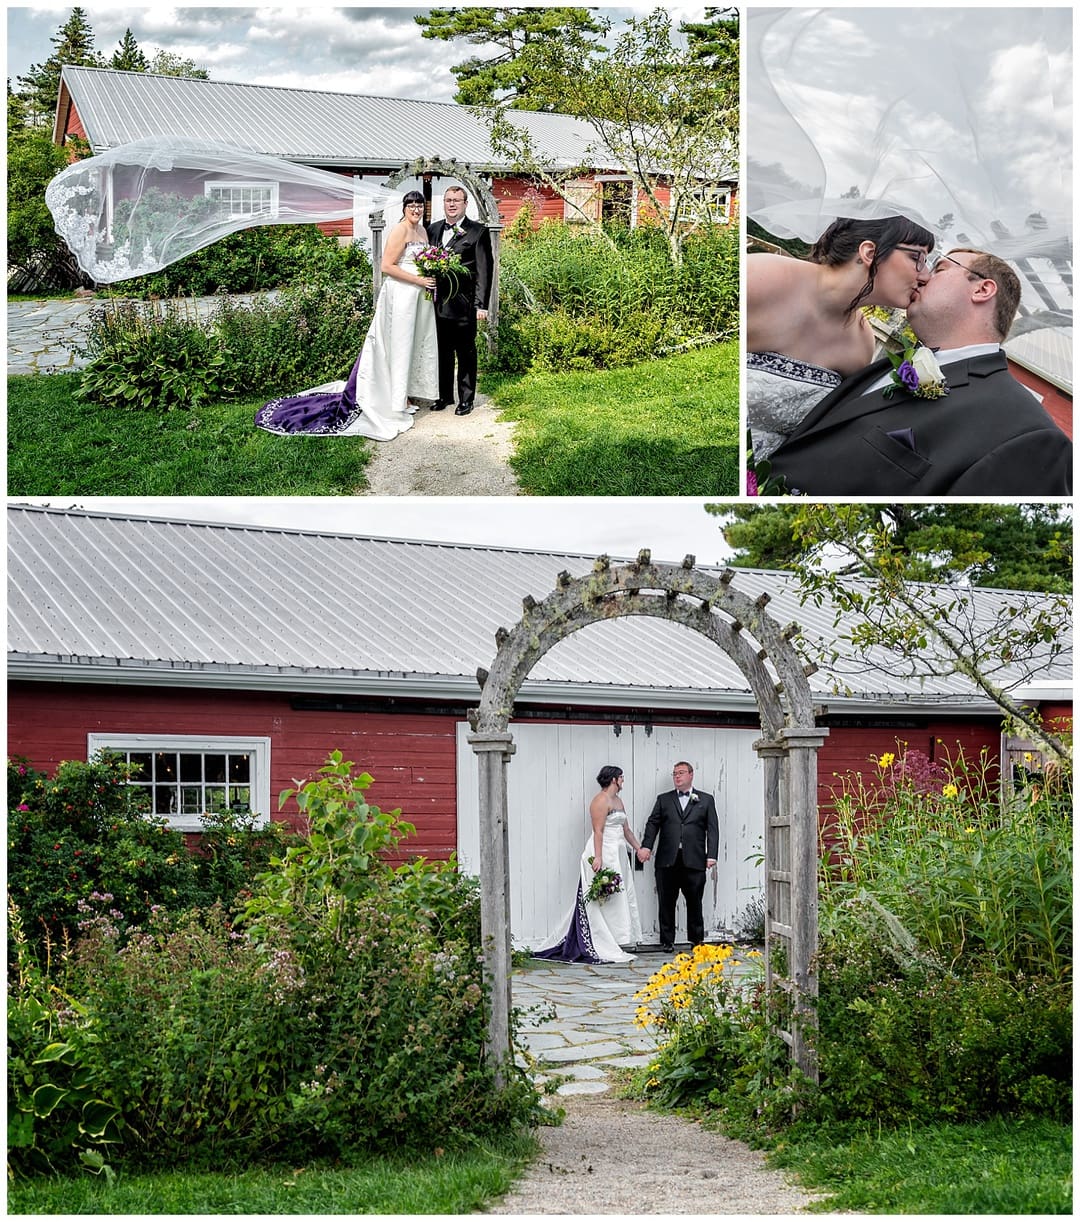 The bride and groom pose for wedding photos during their rustic wedding at the Hubbard's Barn in Nova Scotia.